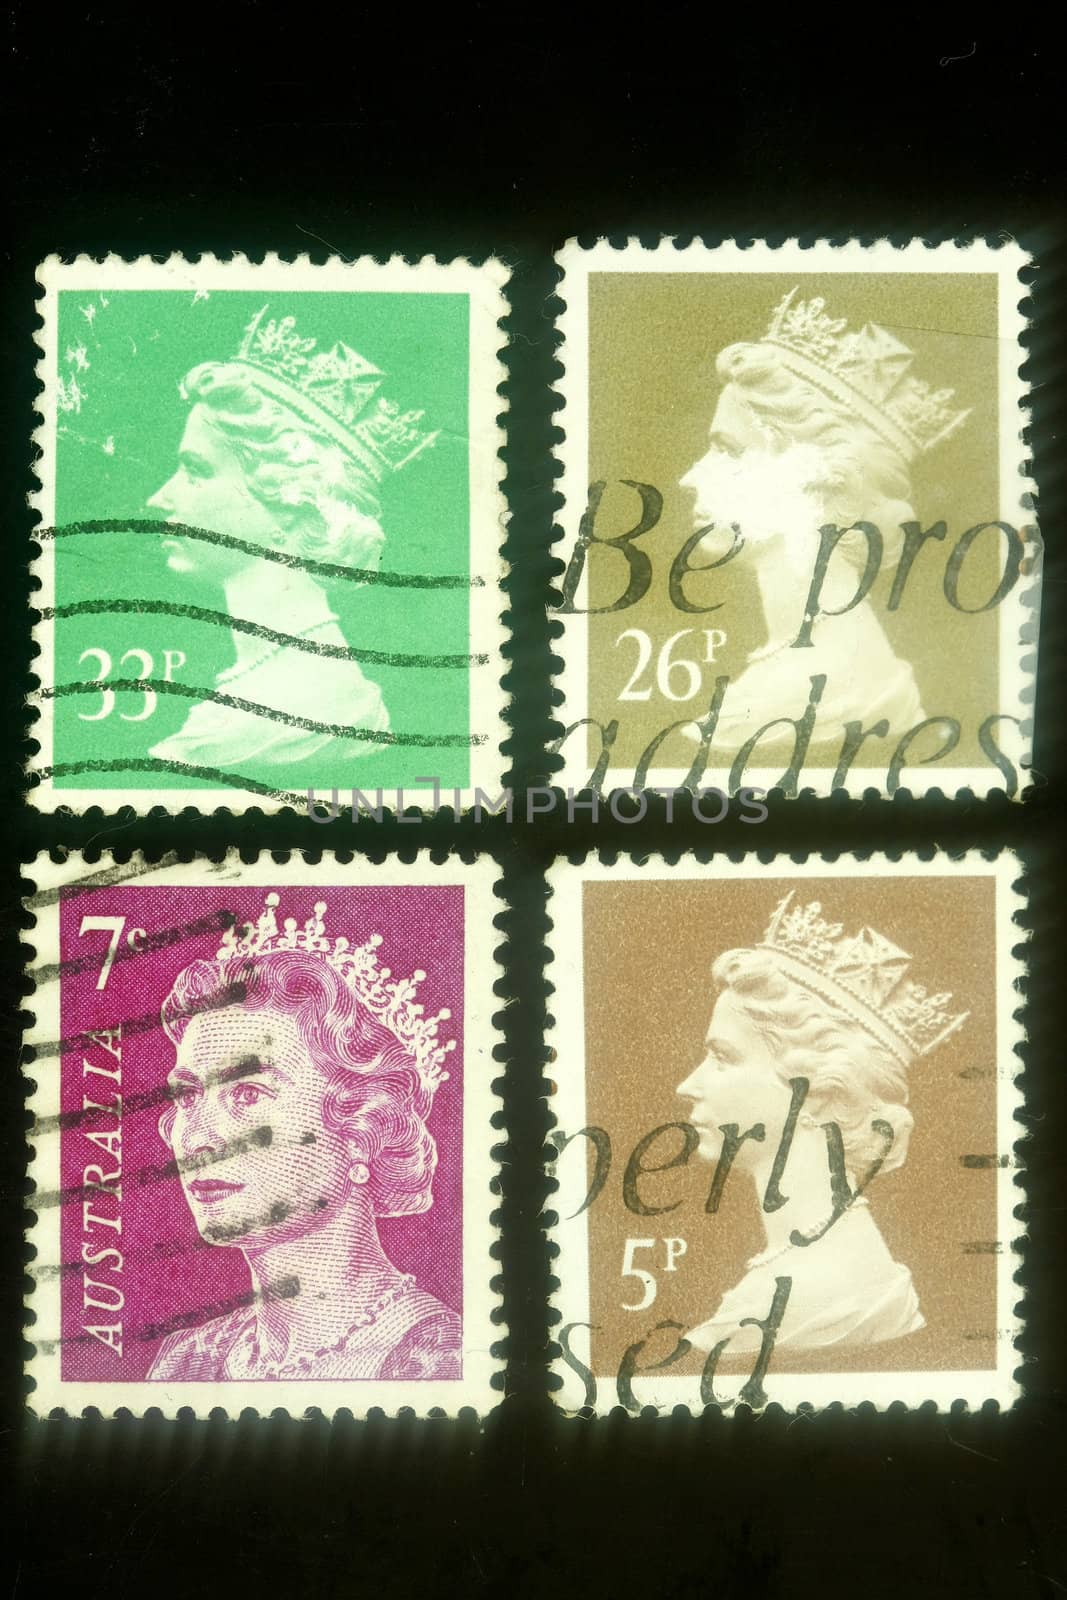 Four Queen Elizabeth Stamps by sacatani